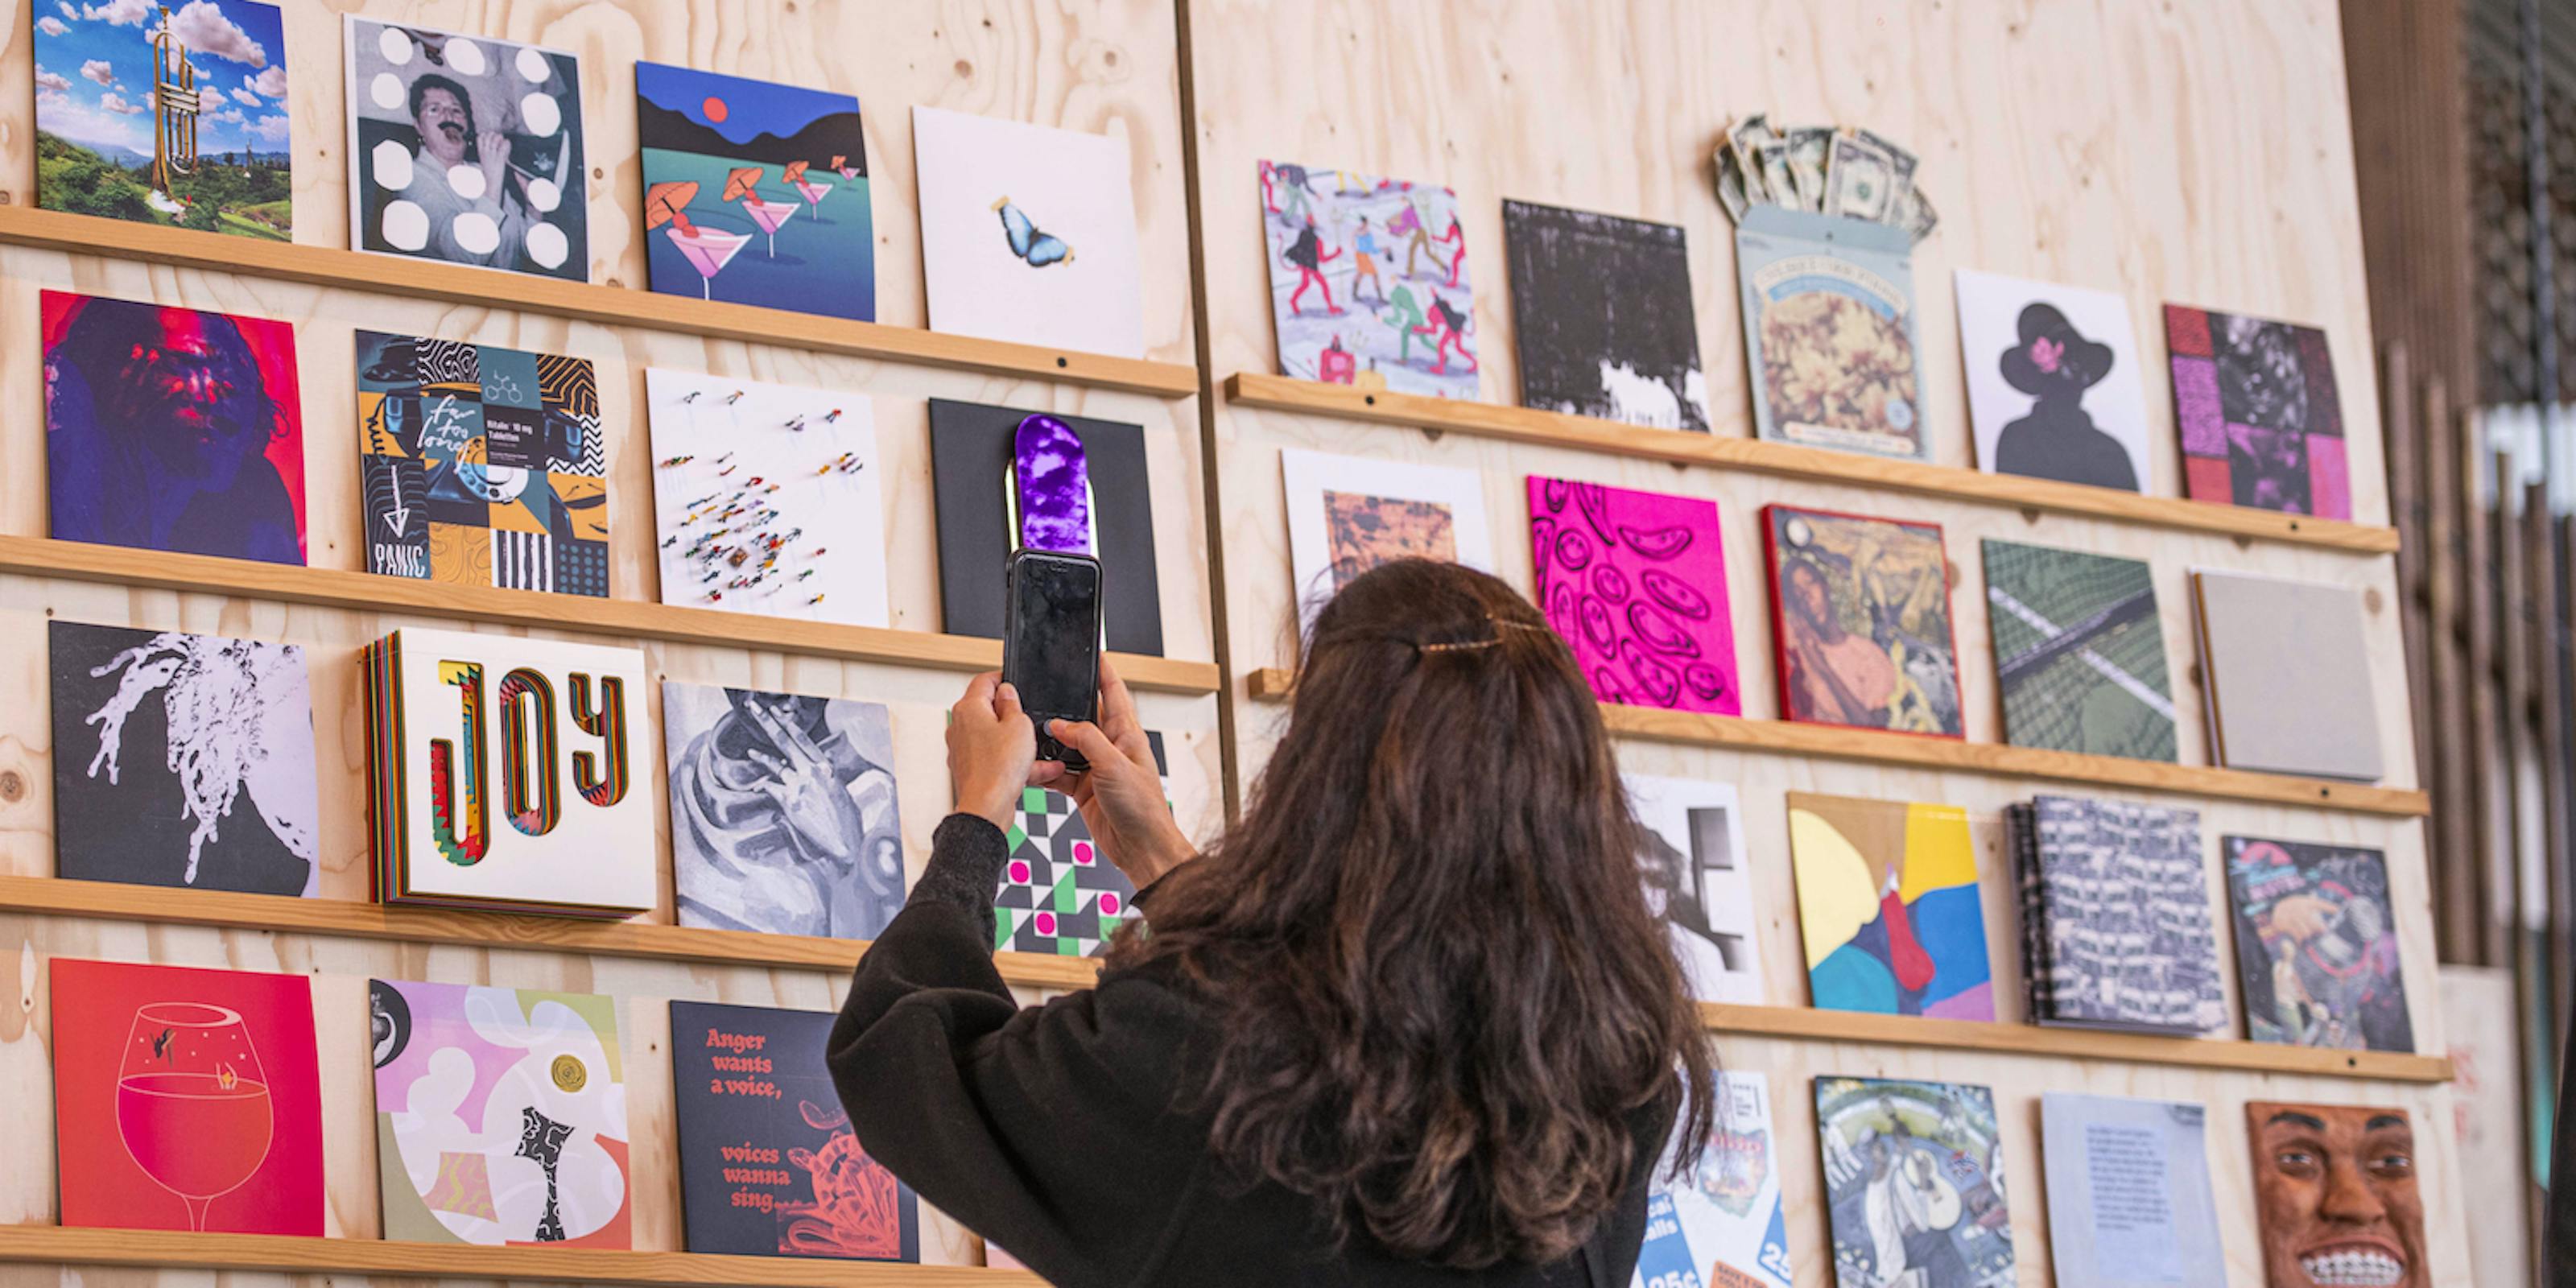 A woman taking an image of the artwork in 2020.